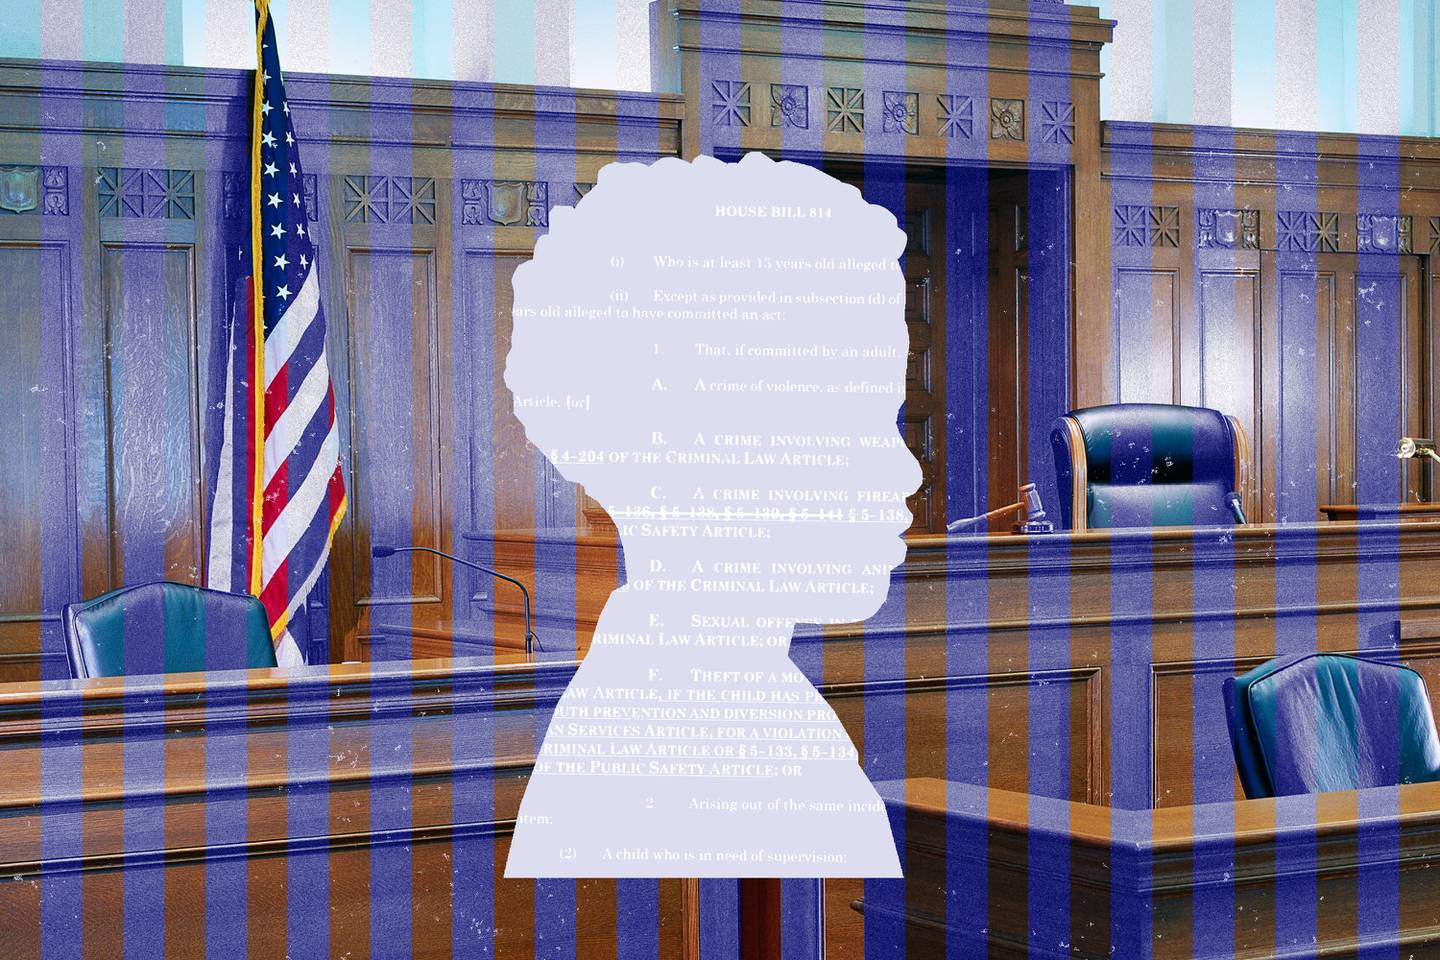 Photo collage of silhouette of young boy’s head and shoulders, with photo of court room with American flag and empty judge’s seat in background.